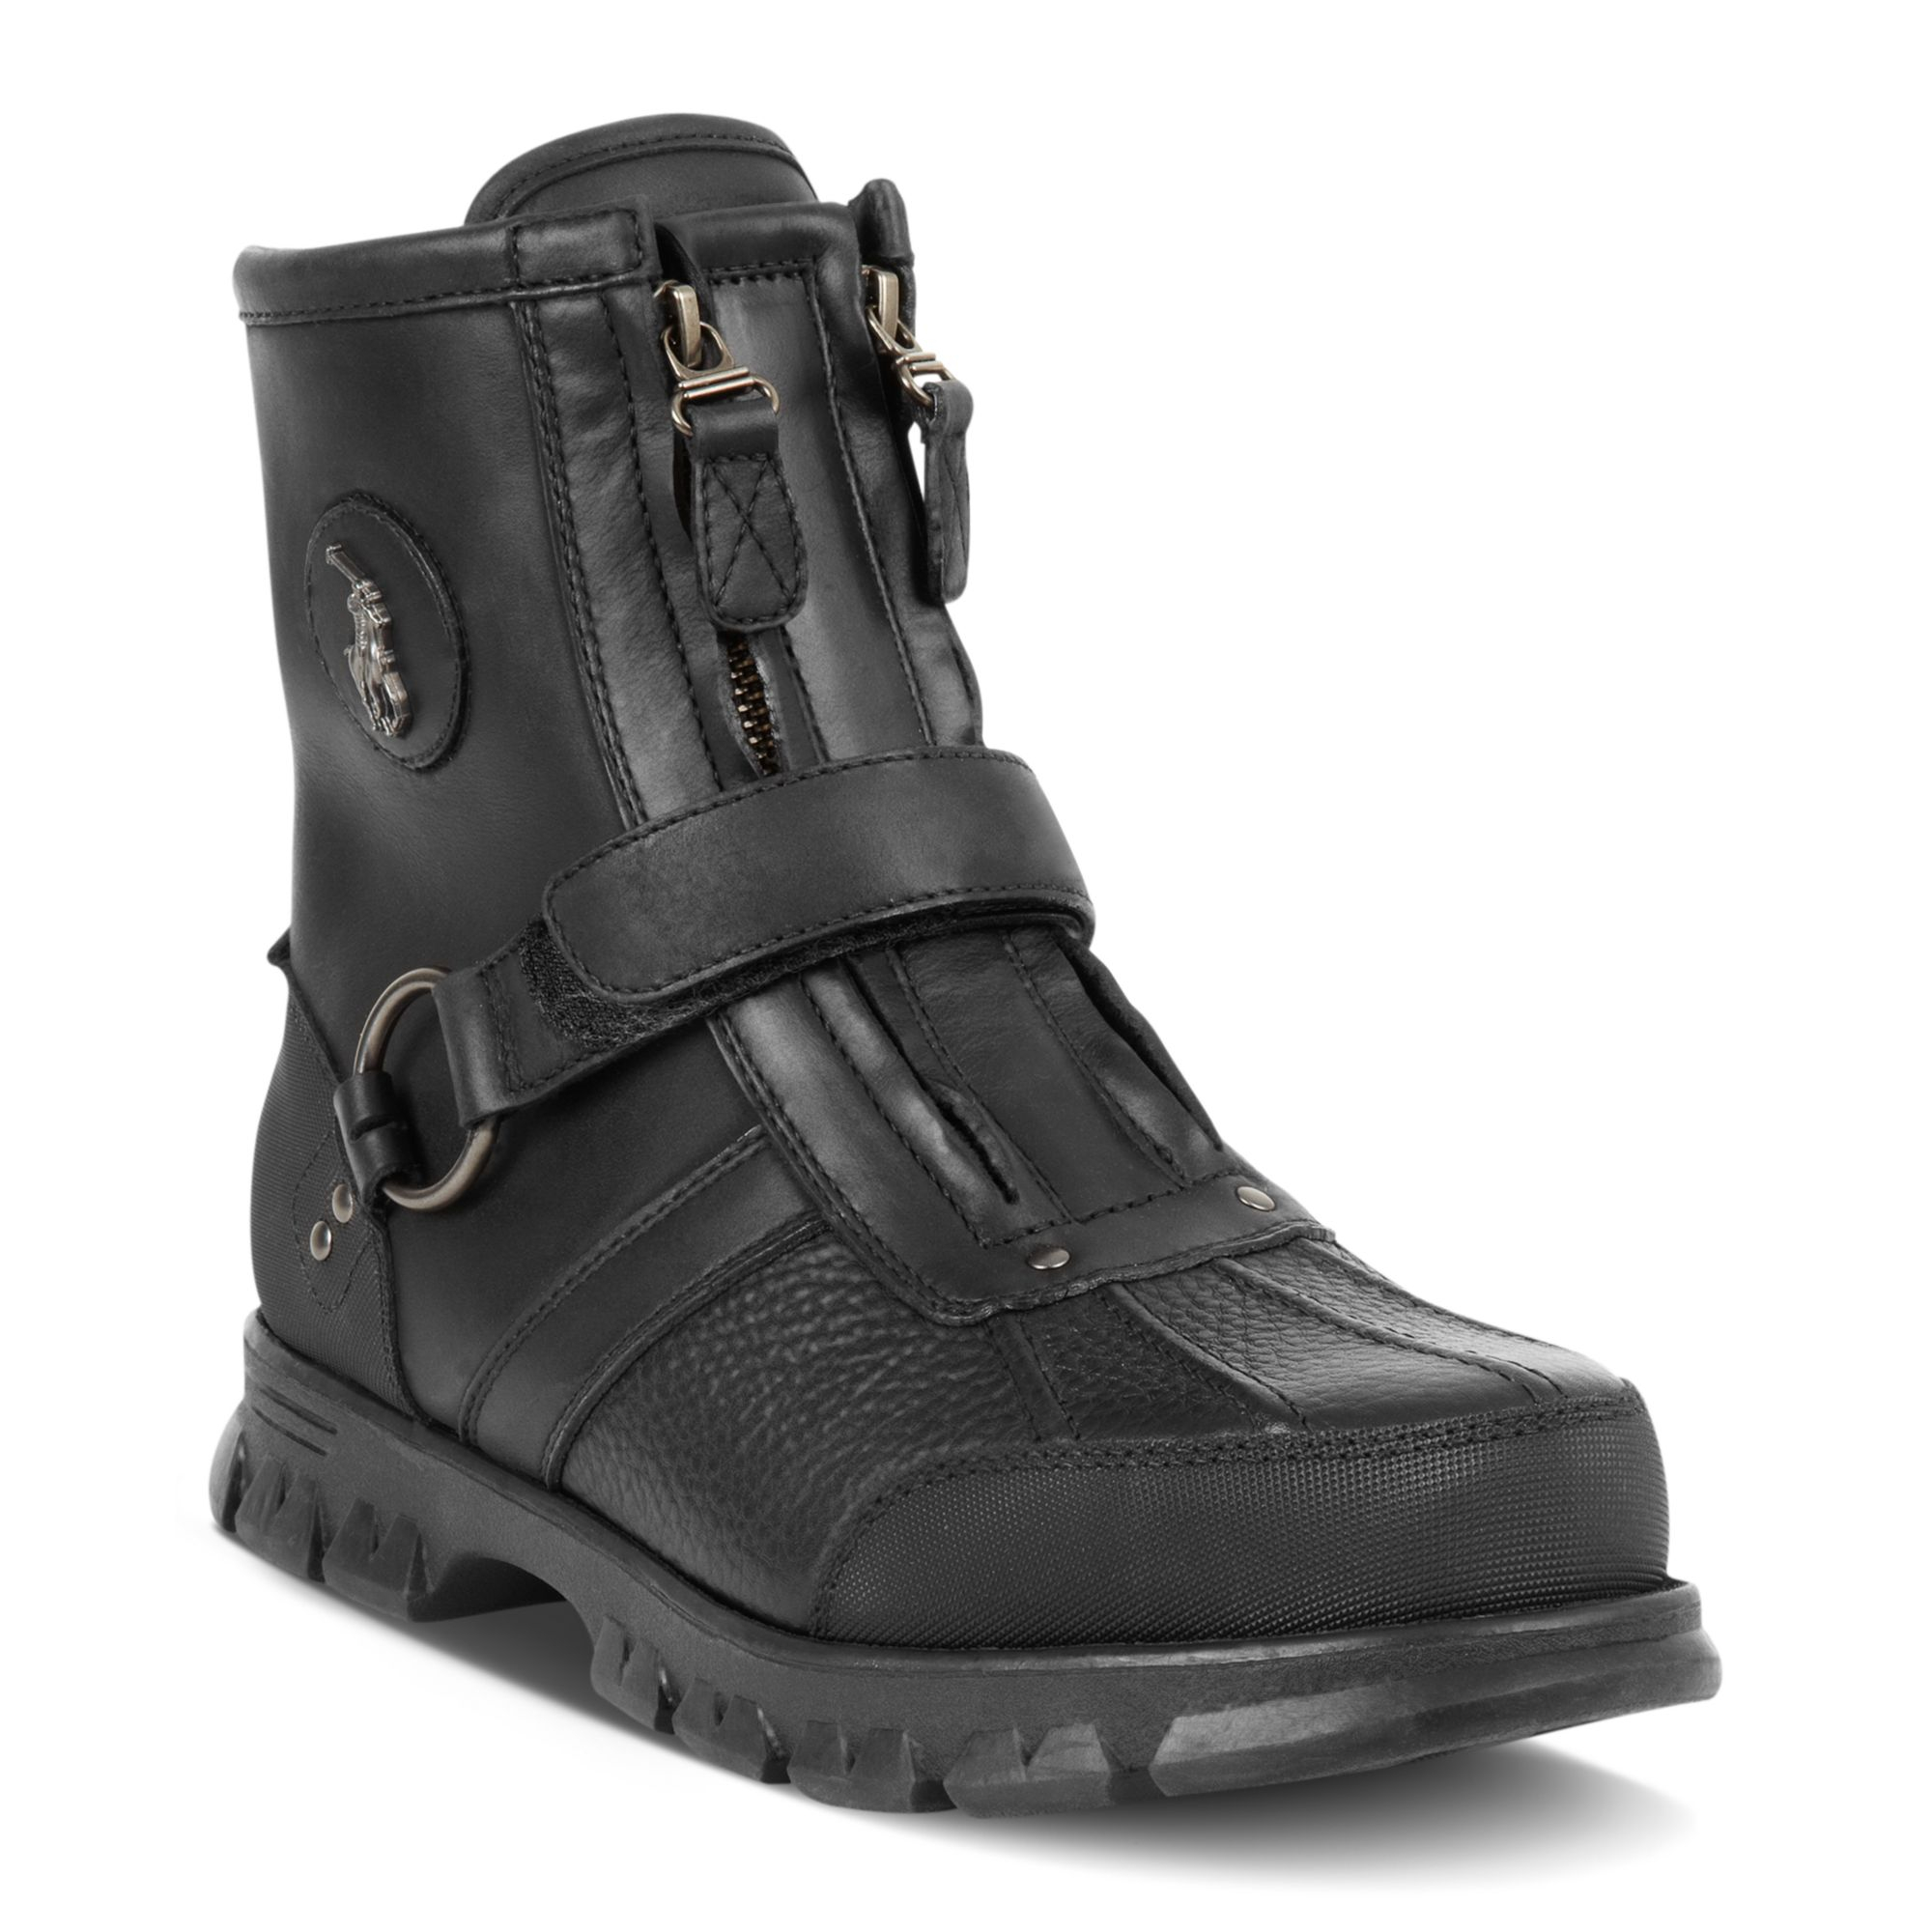 Lyst - Ralph Lauren Polo Conquest Iii High Boots in Black for Men